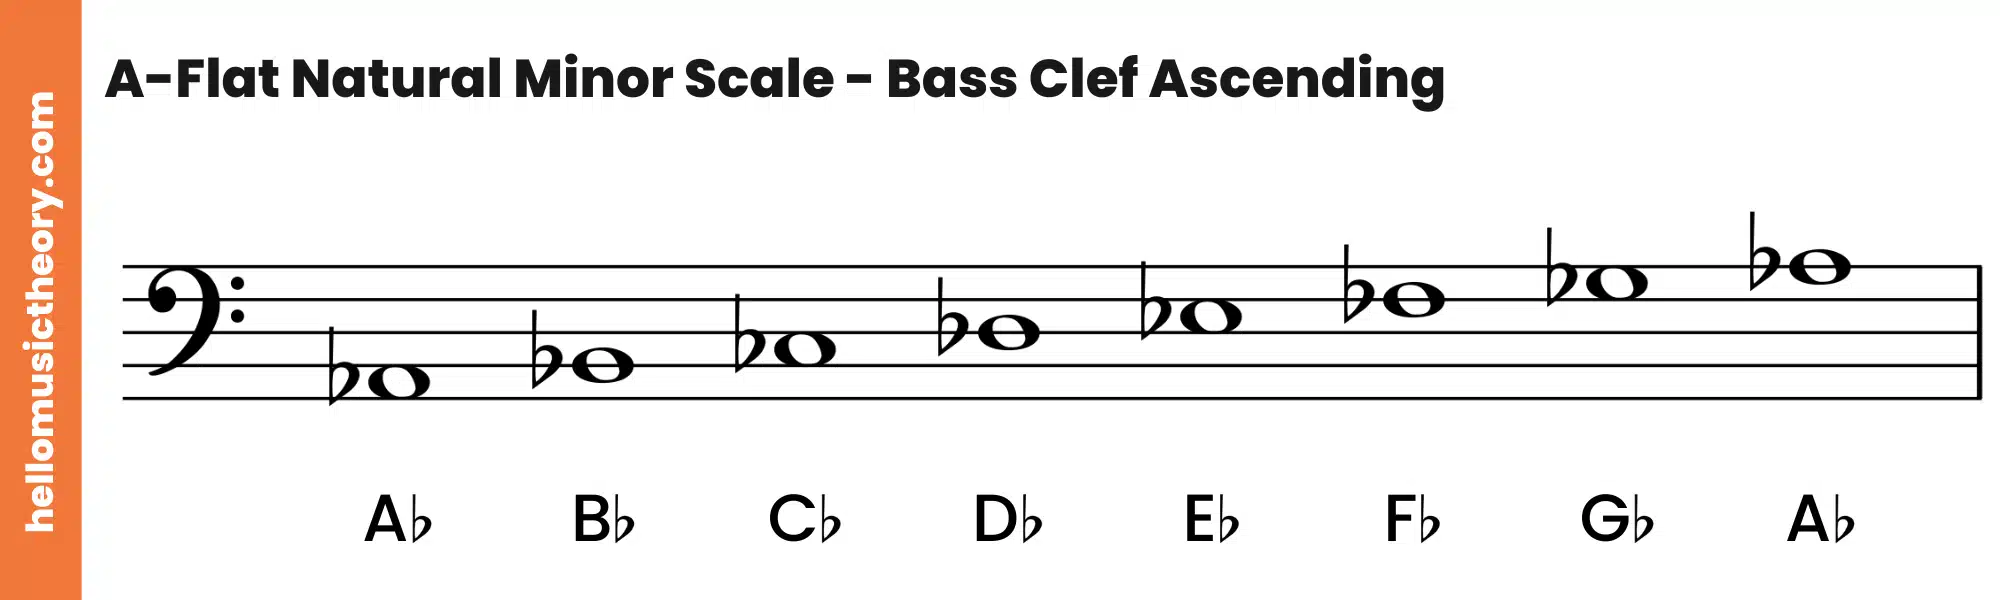 A-Flat Natural Minor Scale Bass Clef Ascending